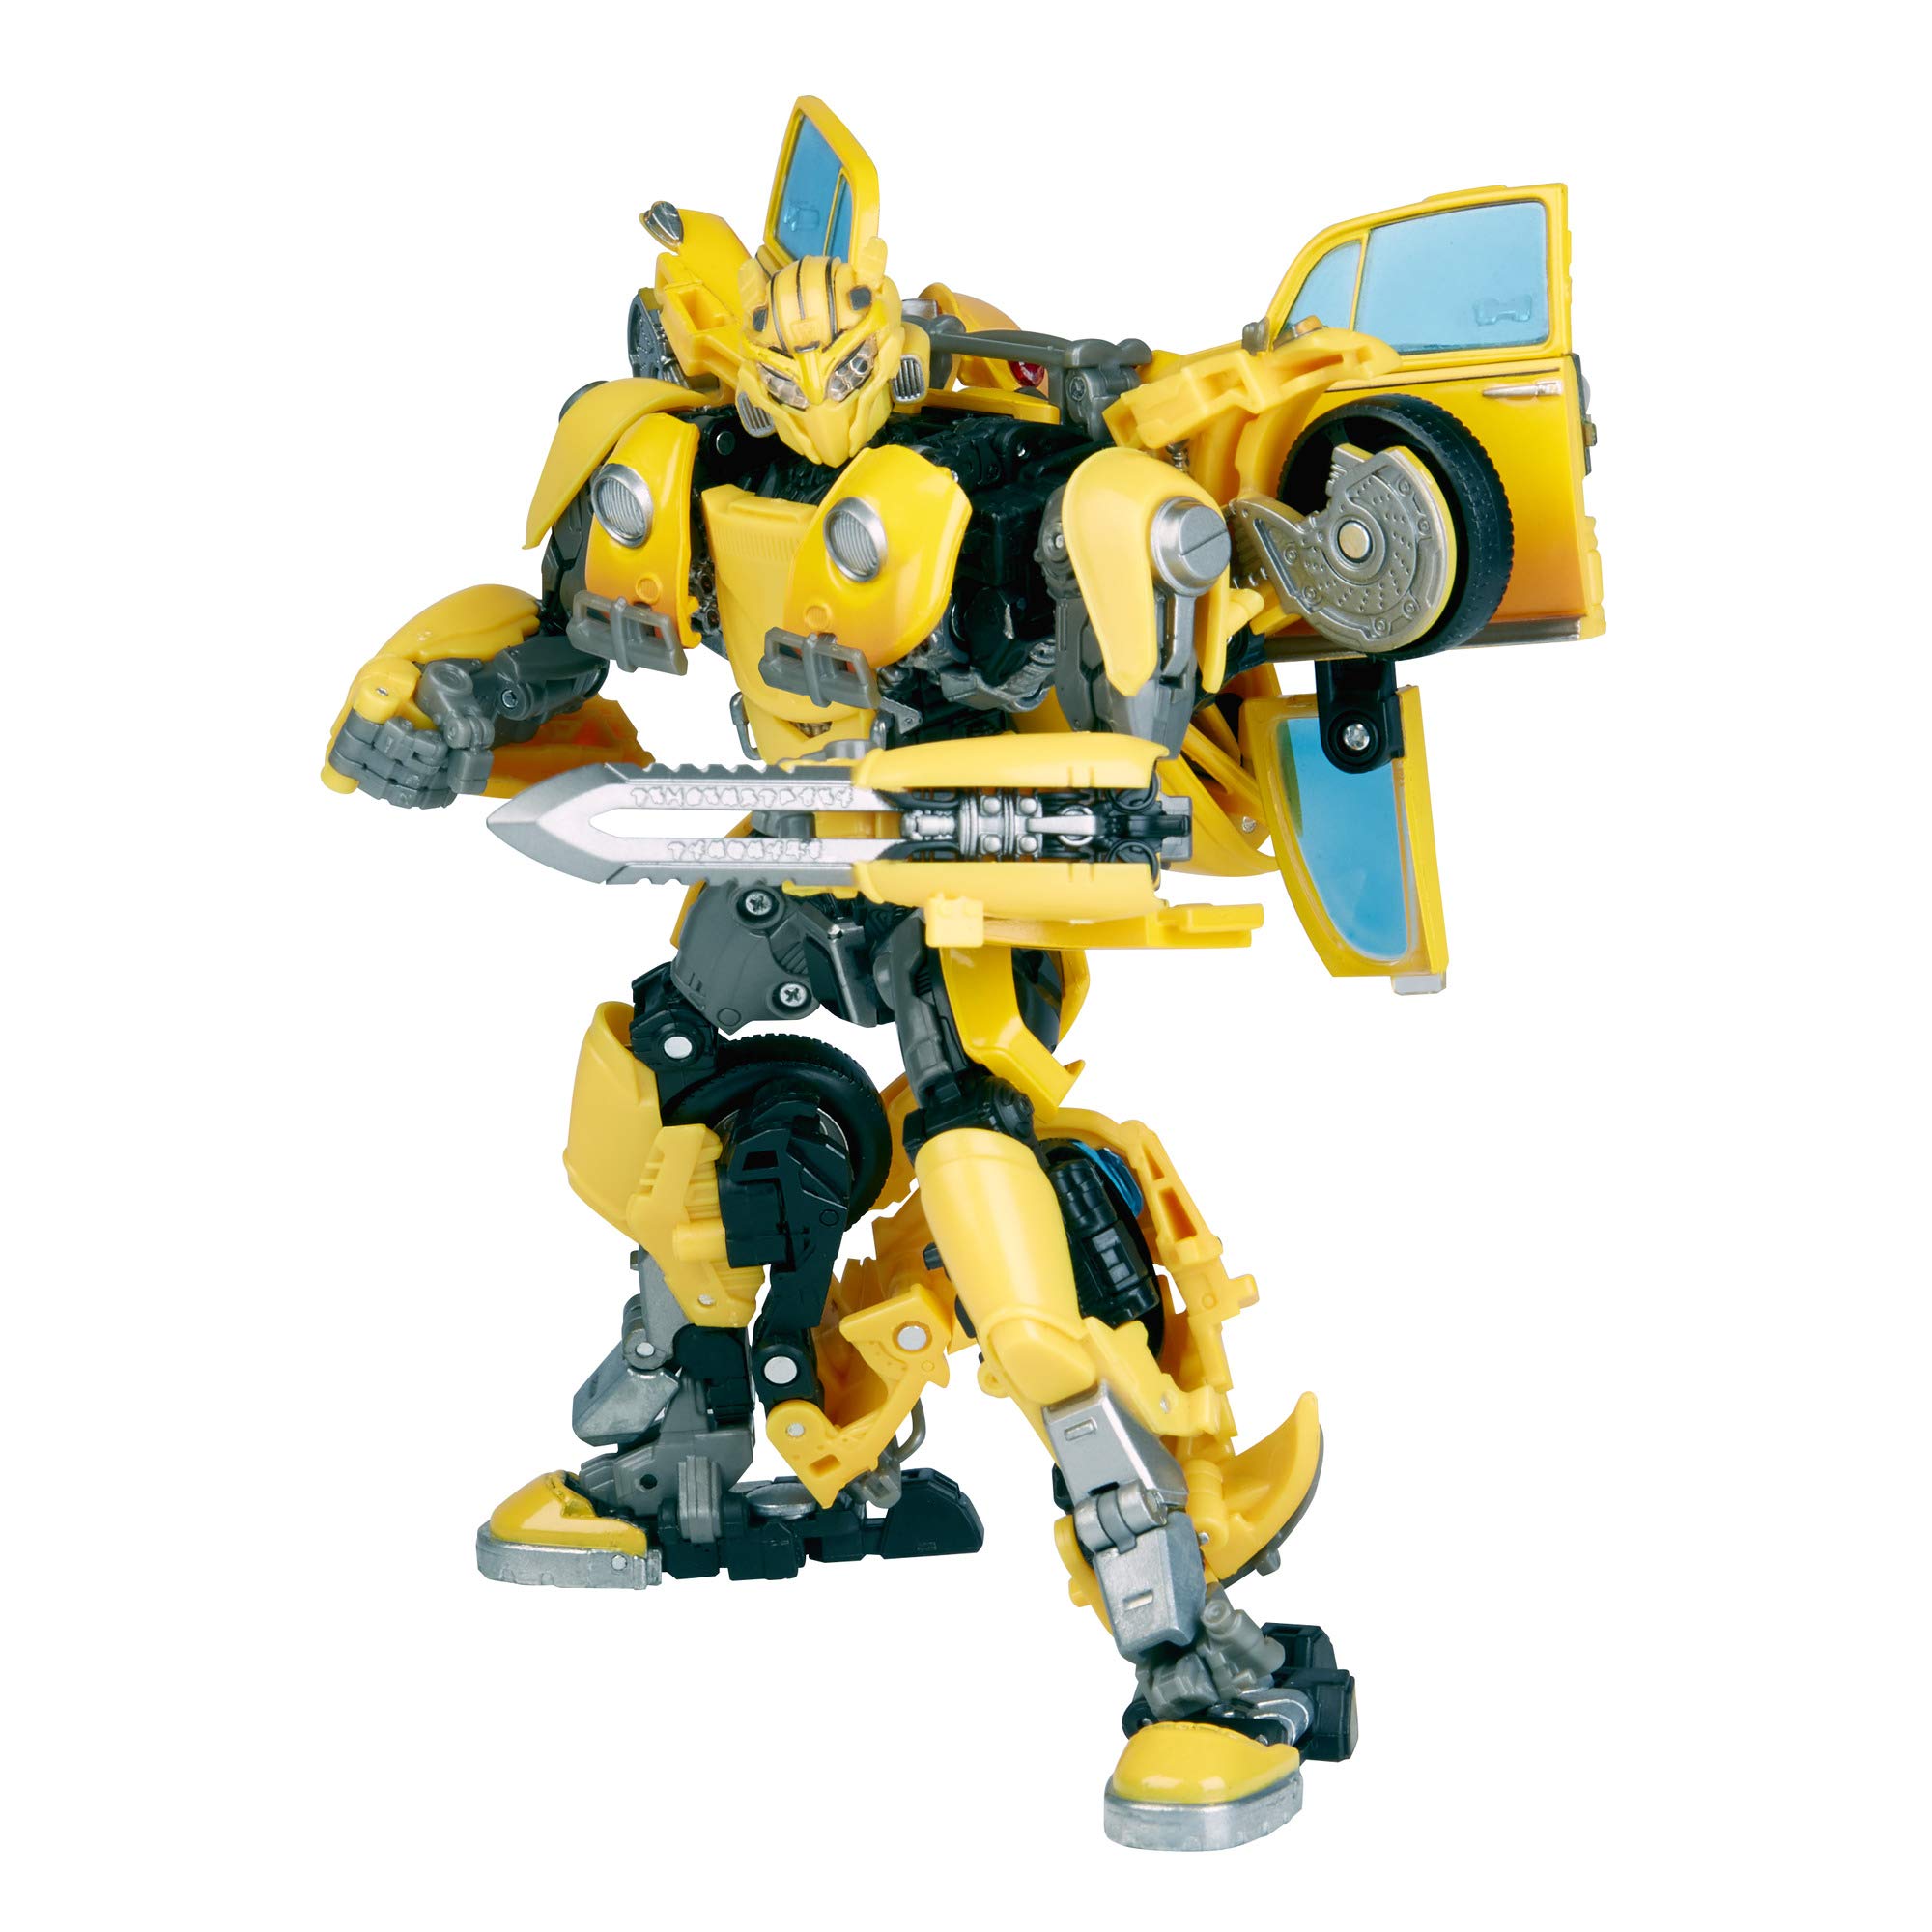 Transformers Official Hasbro-Takara Tomy Collaboration Masterpiece Movie Series Bumblebee MPM-7 Toy